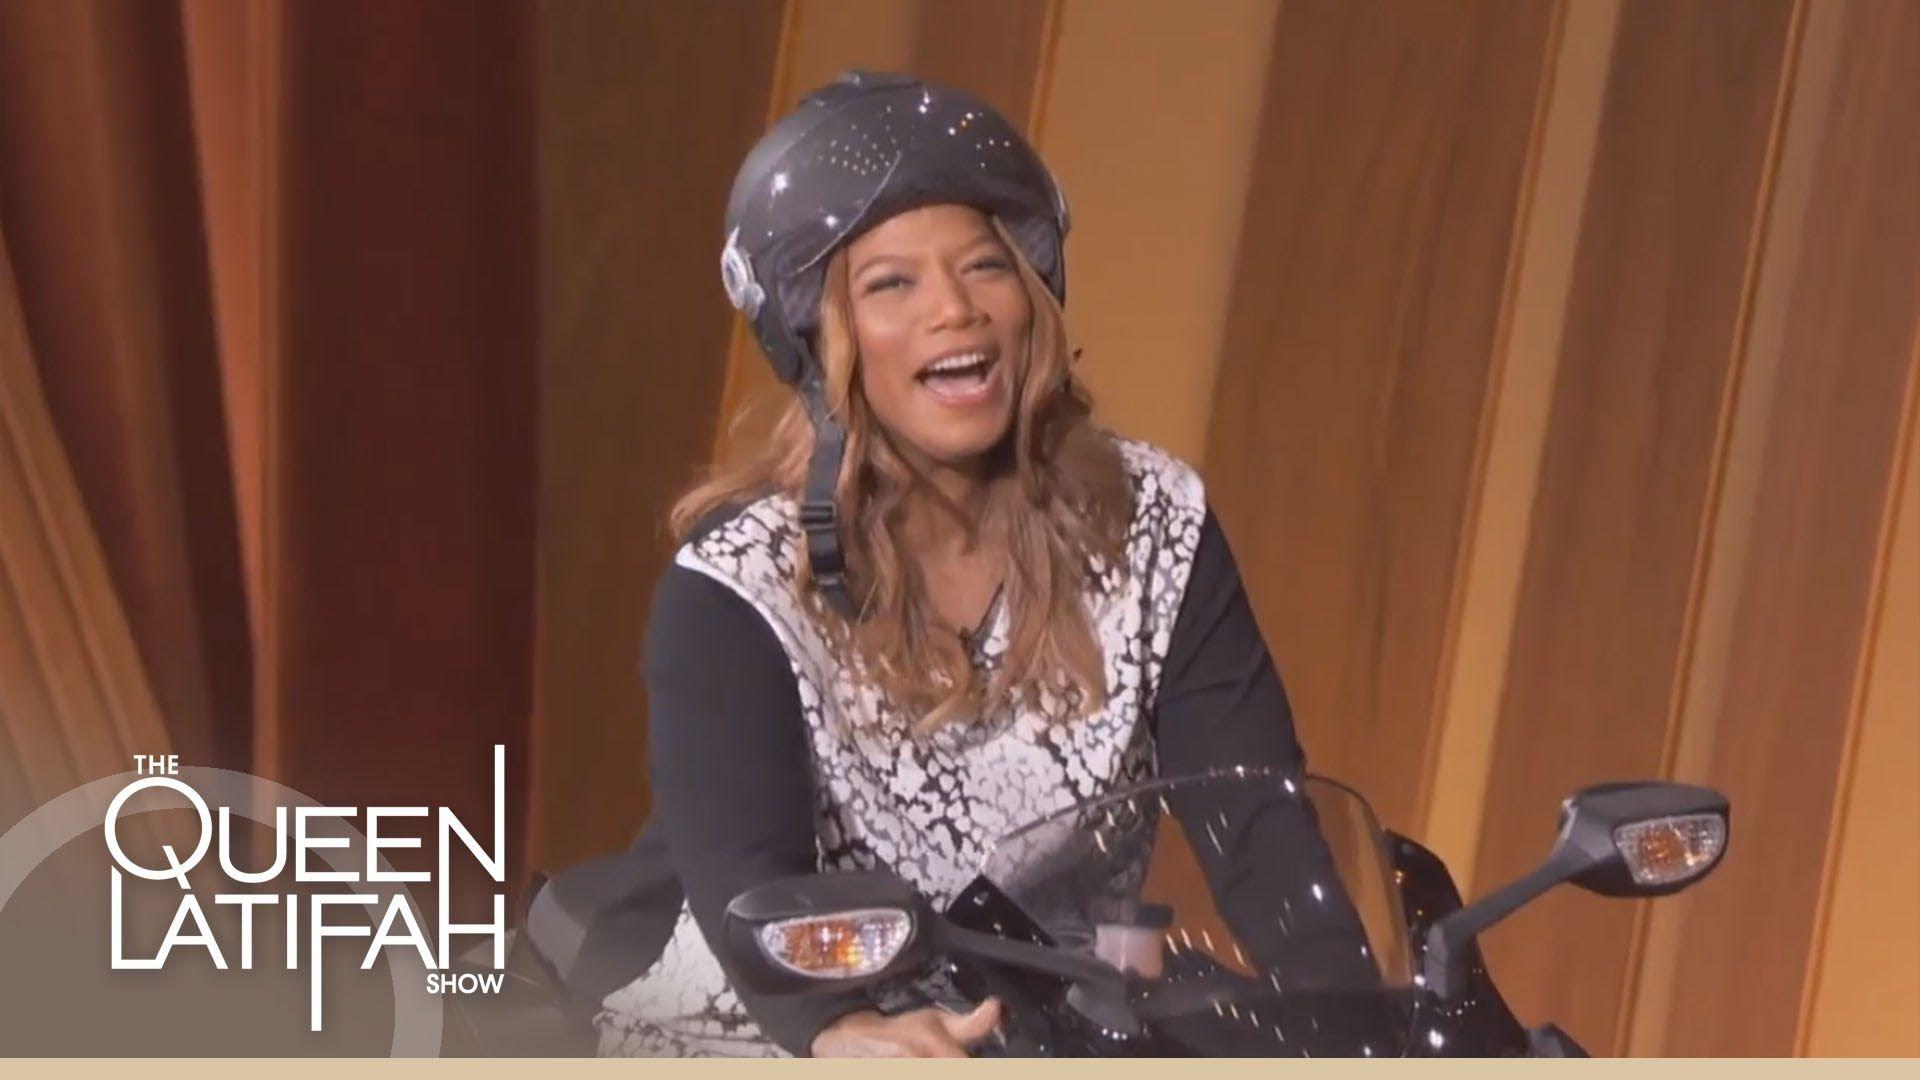 Motorcycle Entrance on The Queen Latifah Show